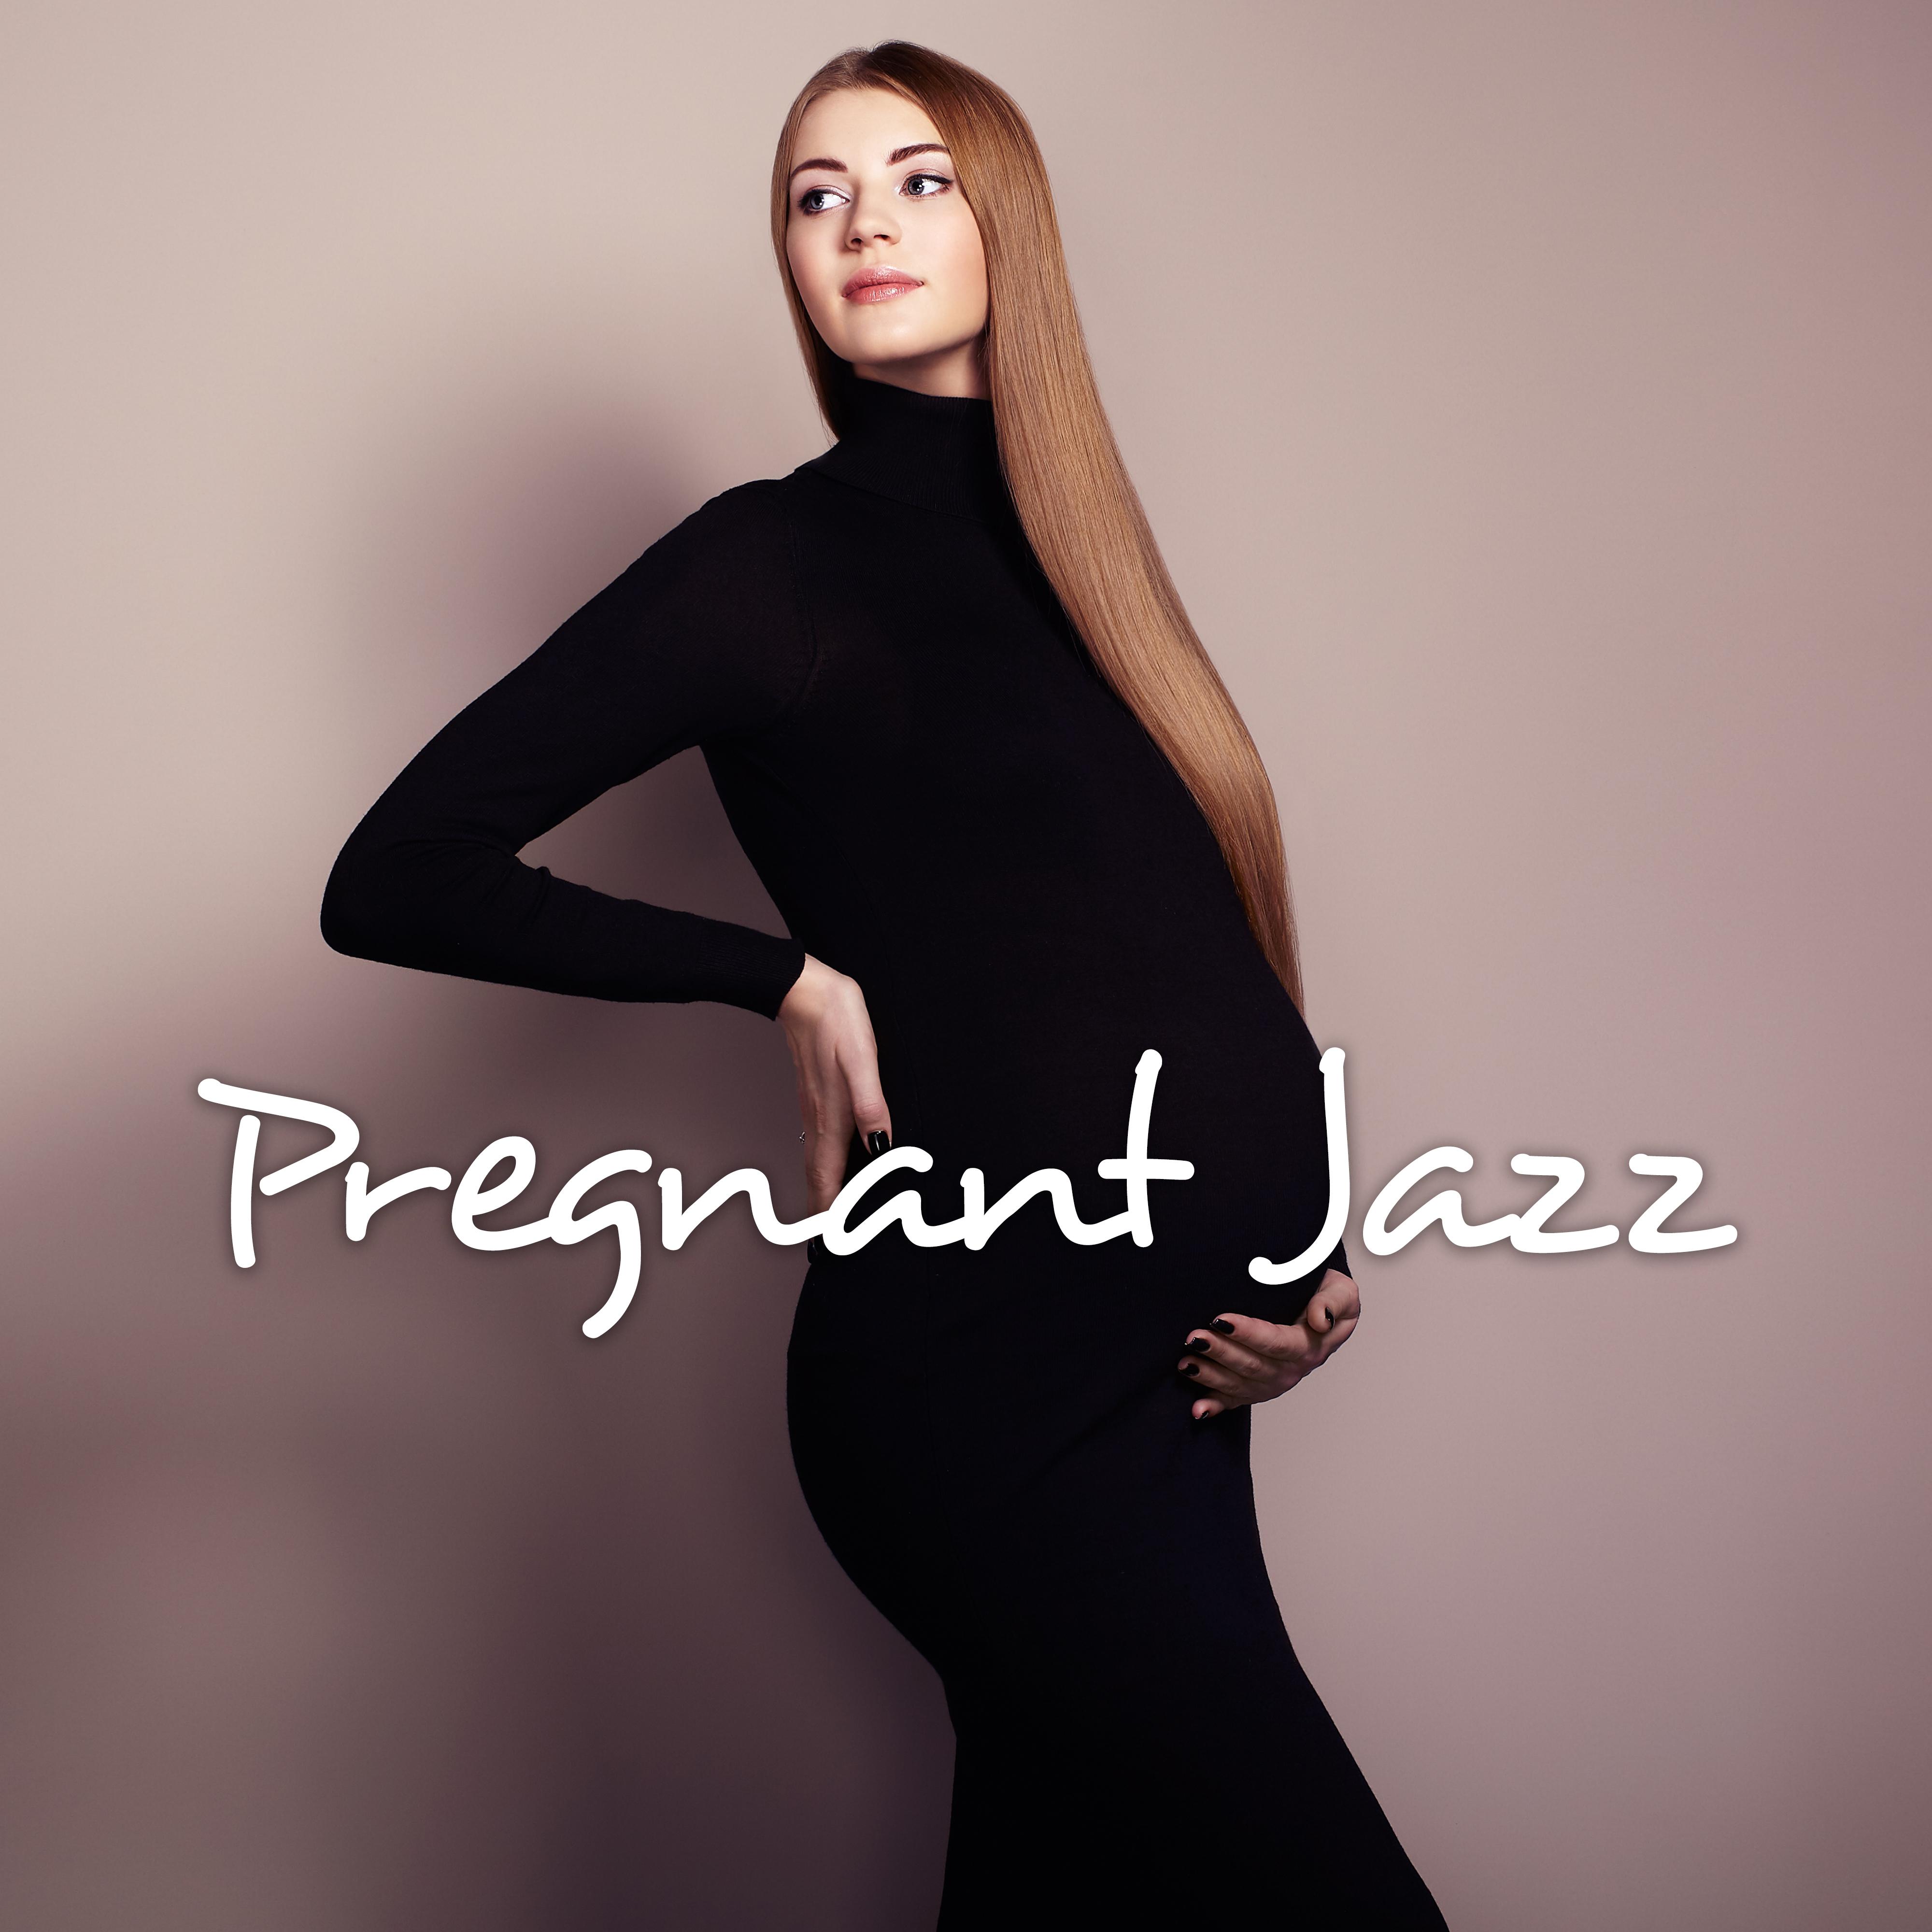 Pregnant Jazz: 15 Calming, Relaxing and Peaceful Melodies to Calm Down, Relax, Chill Out and Rest During Pregnancy